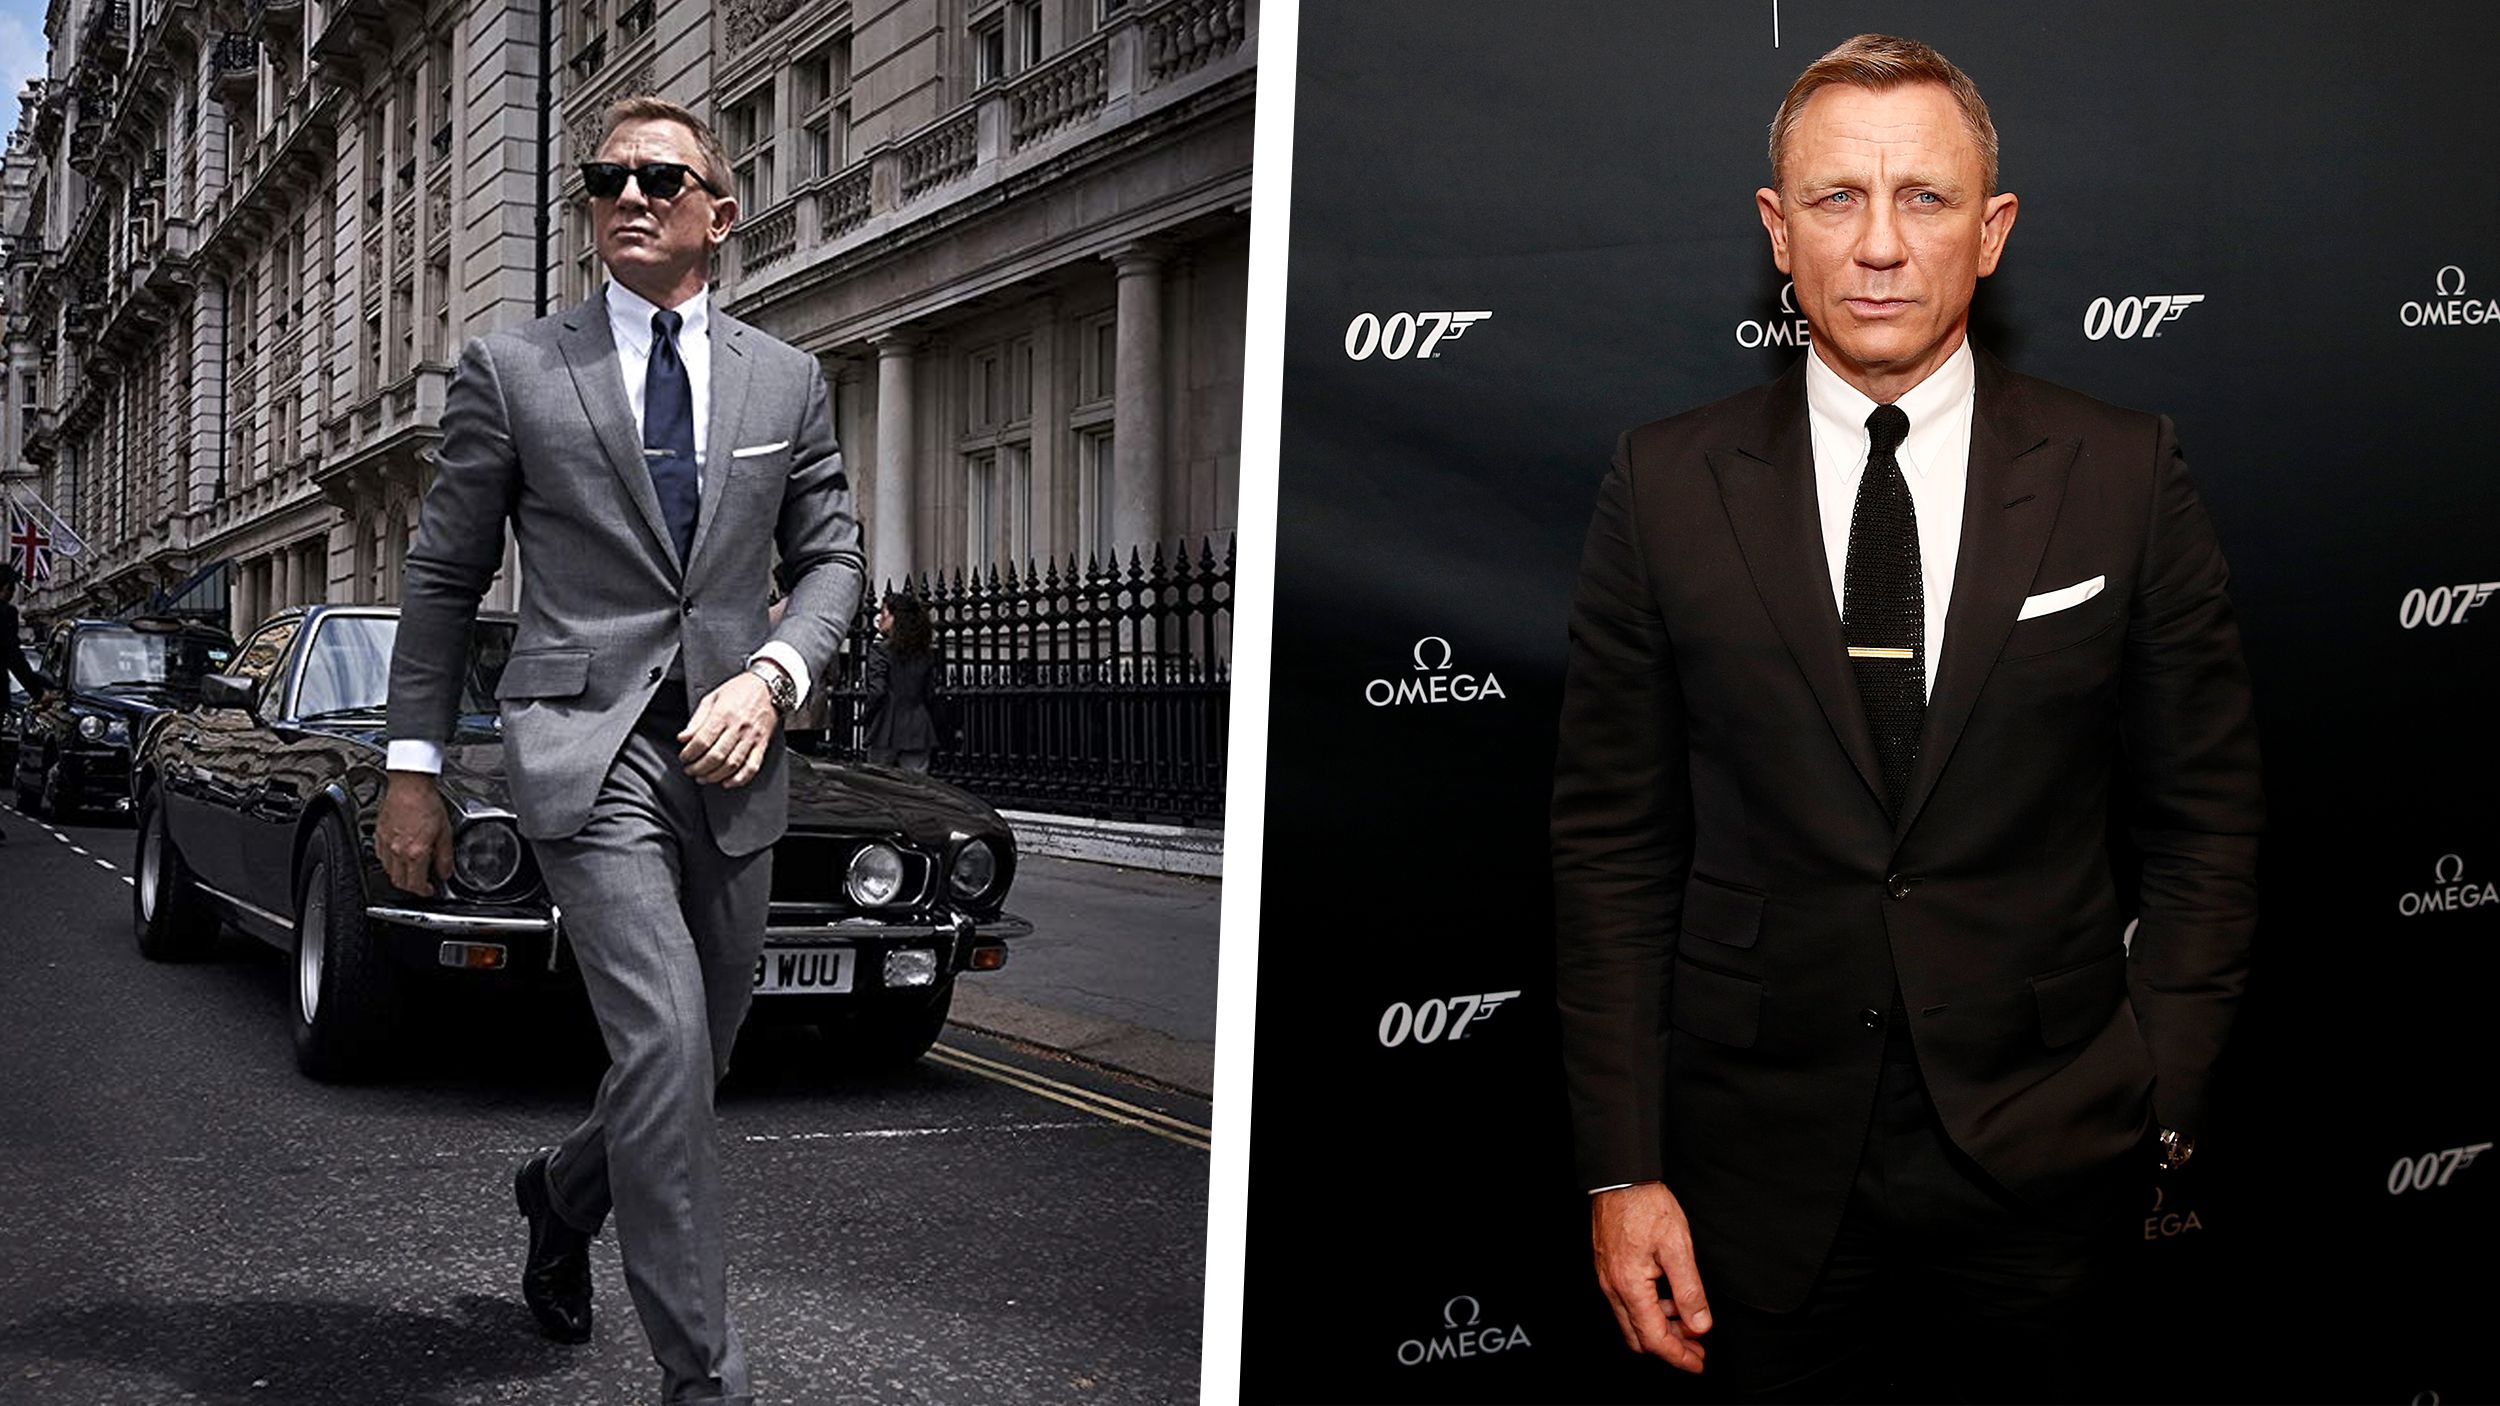 Knogle Gør det tungt Slime No Time to Die: How to Dress Like Daniel Craig as James Bond With 007 Style